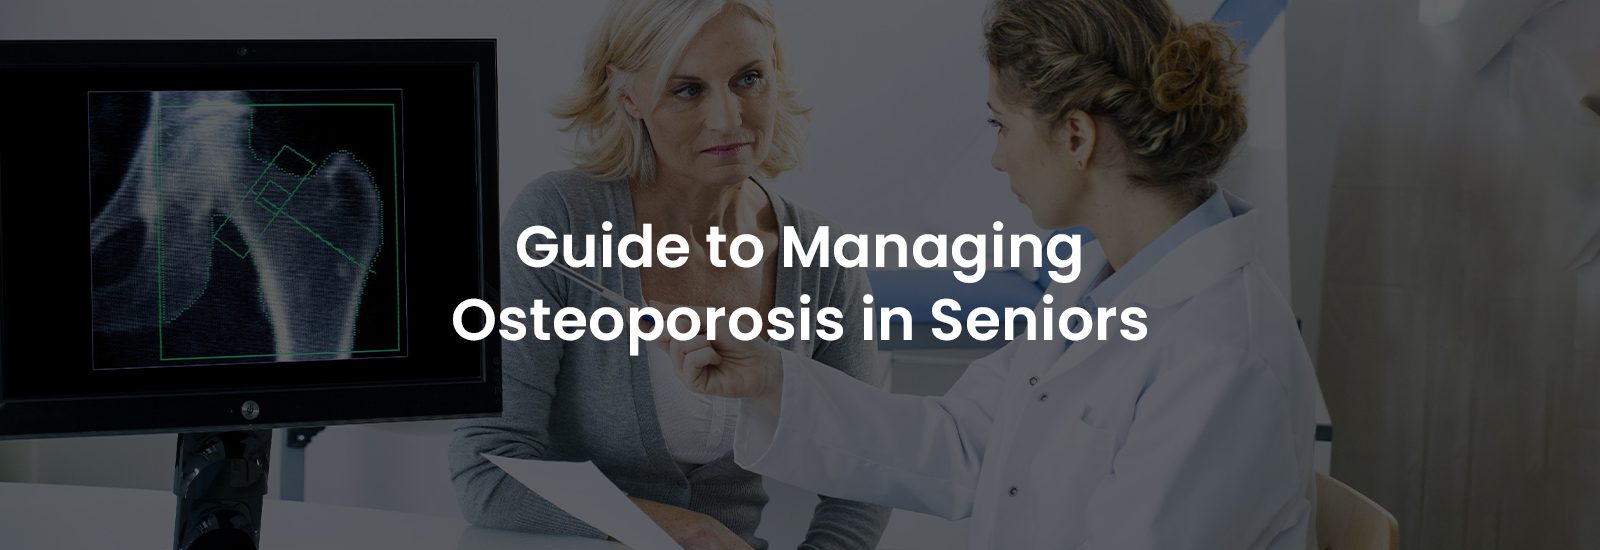 Guide to Managing Osteoporosis in Seniors | Banner Image